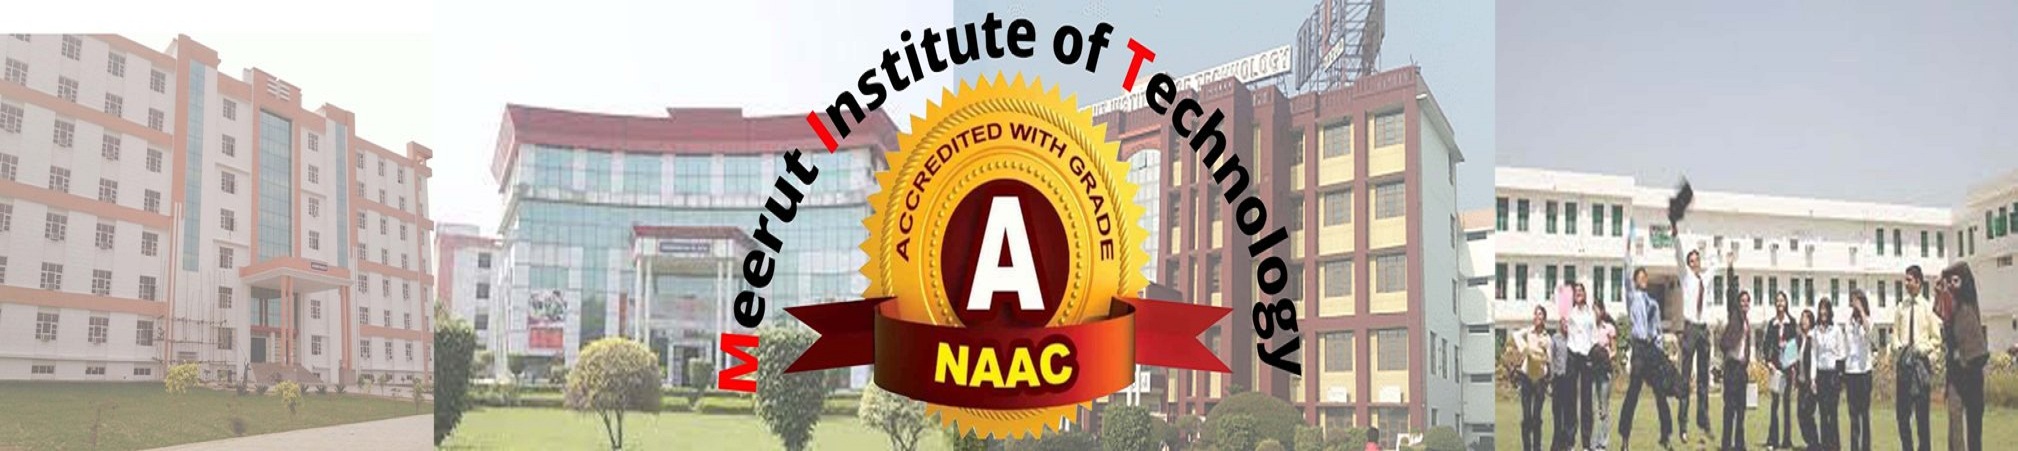 NAAC A grade college in Meerut, UP